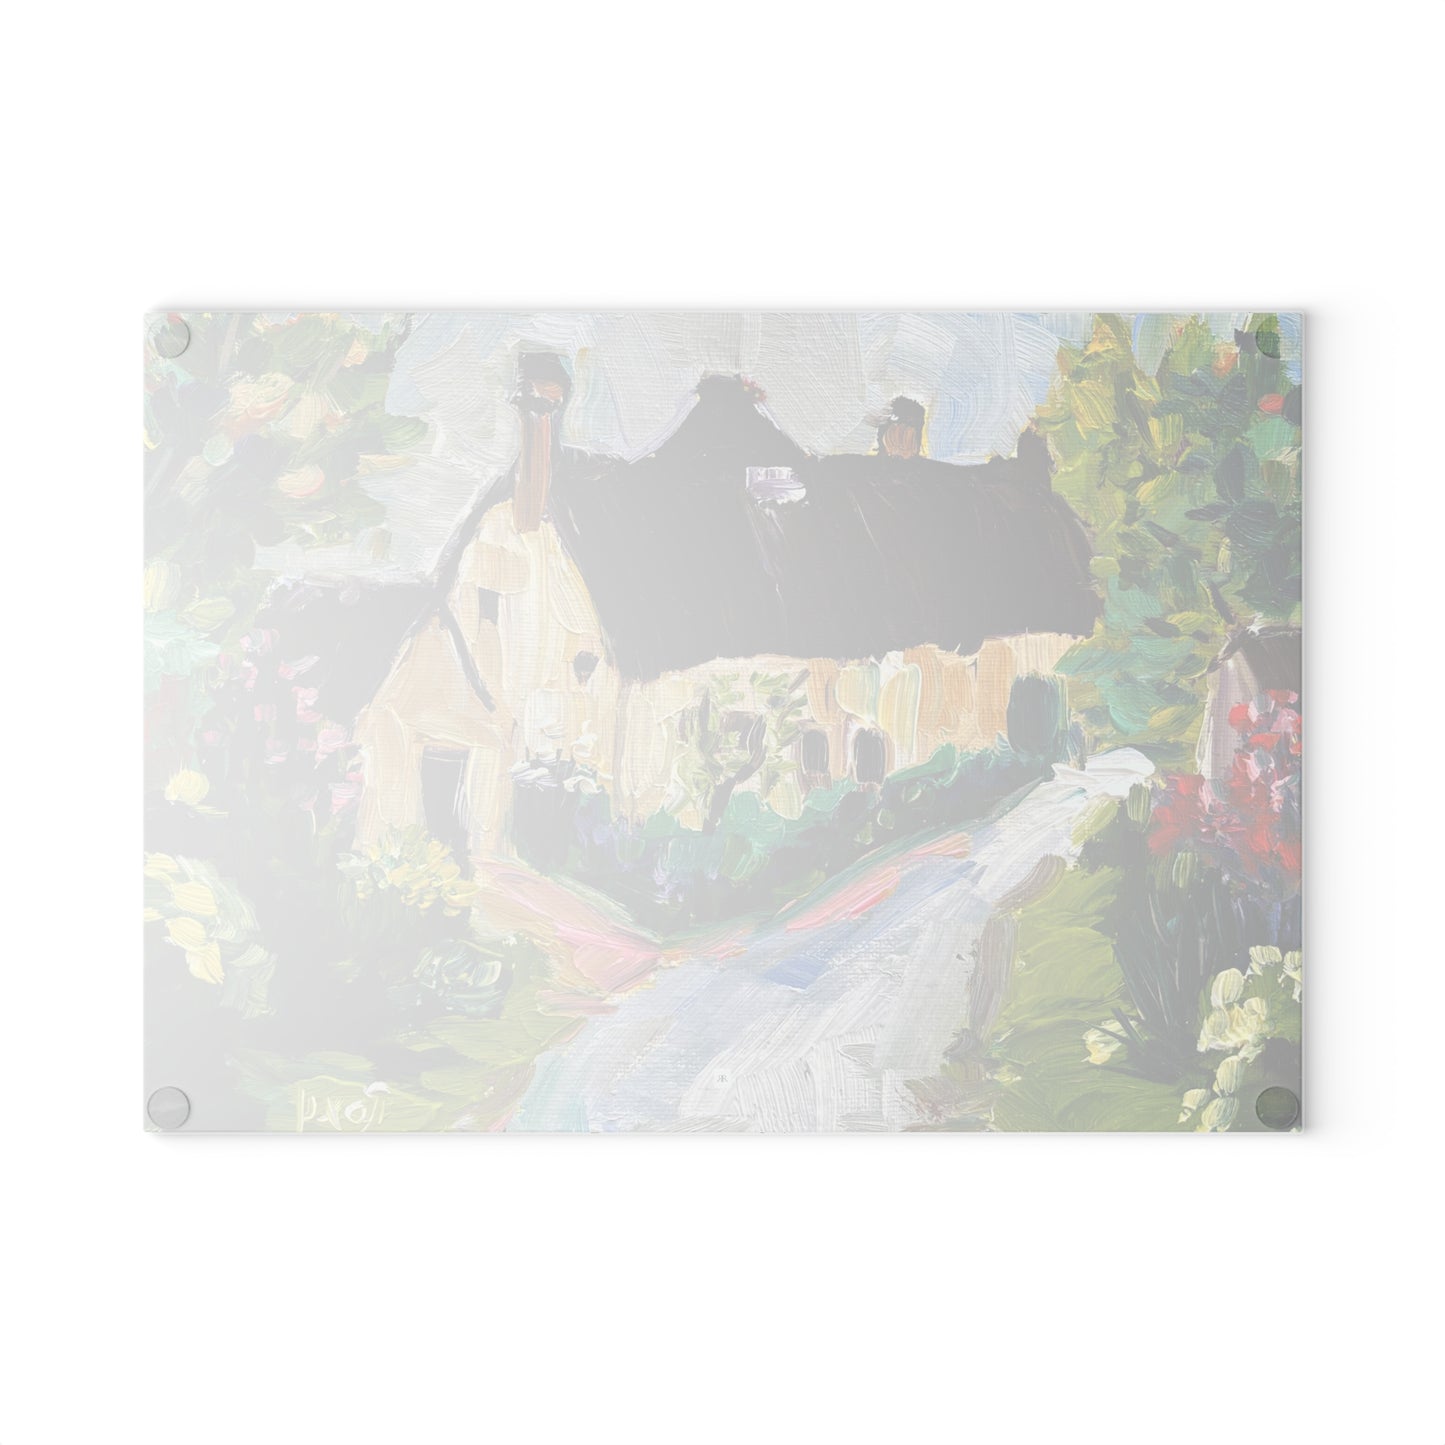 Charming Hideaway Cotswolds Glass Cutting Board